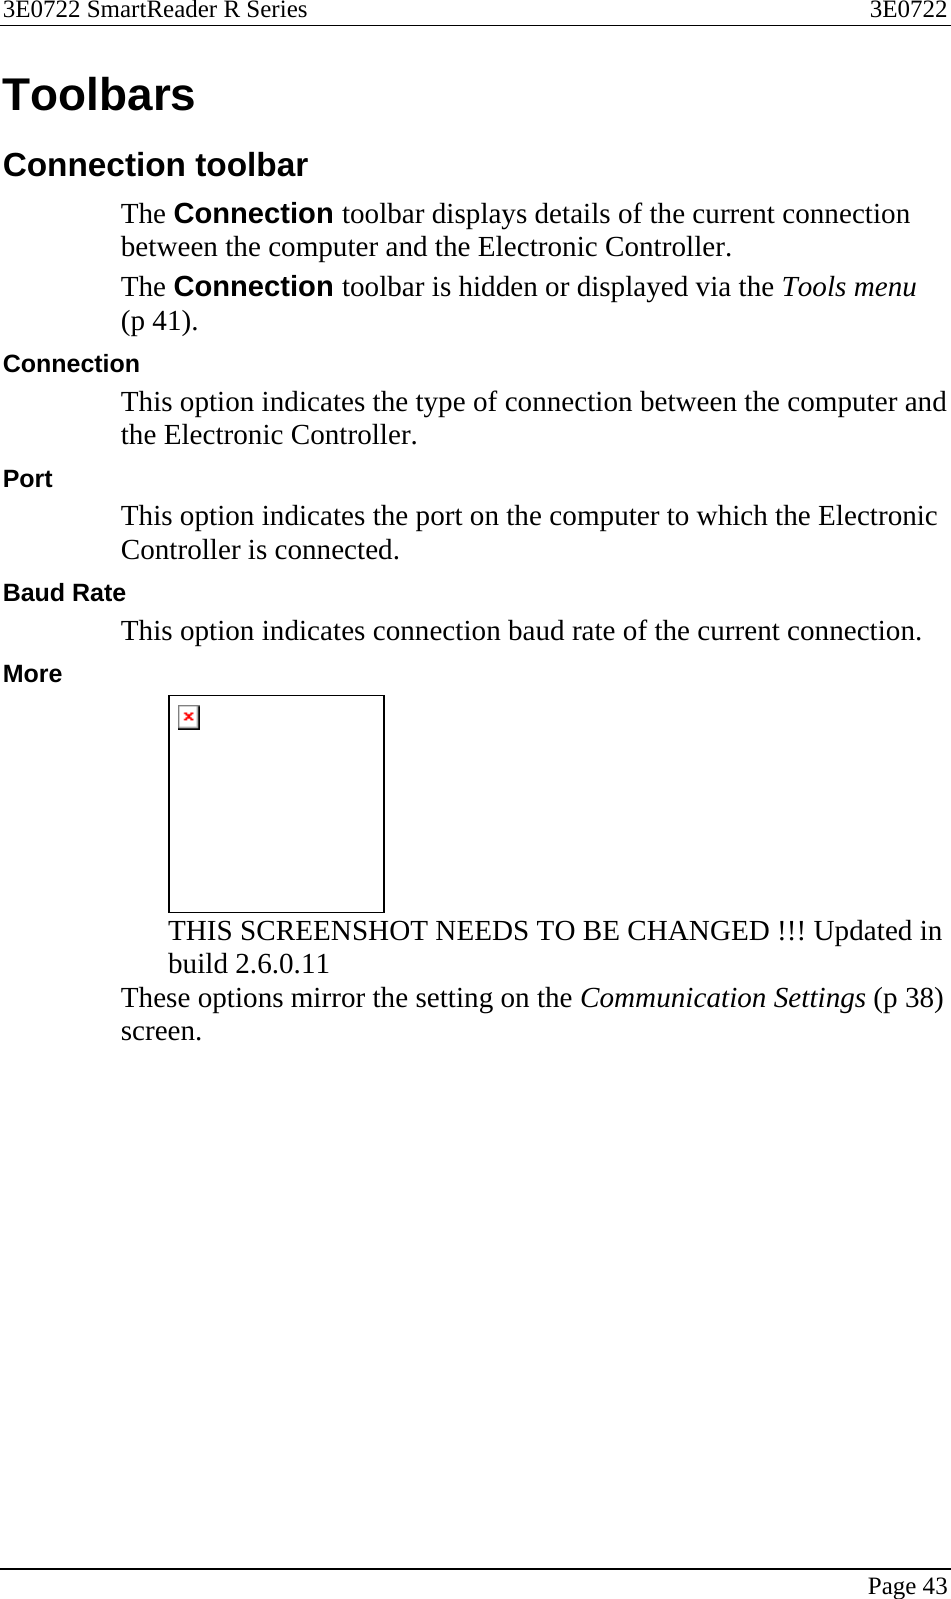 3E0722 SmartReader R Series  3E0722   Page 43  Toolbars Connection toolbar The Connection toolbar displays details of the current connection between the computer and the Electronic Controller. The Connection toolbar is hidden or displayed via the Tools menu (p 41). Connection This option indicates the type of connection between the computer and the Electronic Controller. Port This option indicates the port on the computer to which the Electronic Controller is connected. Baud Rate This option indicates connection baud rate of the current connection. More  THIS SCREENSHOT NEEDS TO BE CHANGED !!! Updated in build 2.6.0.11 These options mirror the setting on the Communication Settings (p 38) screen.  